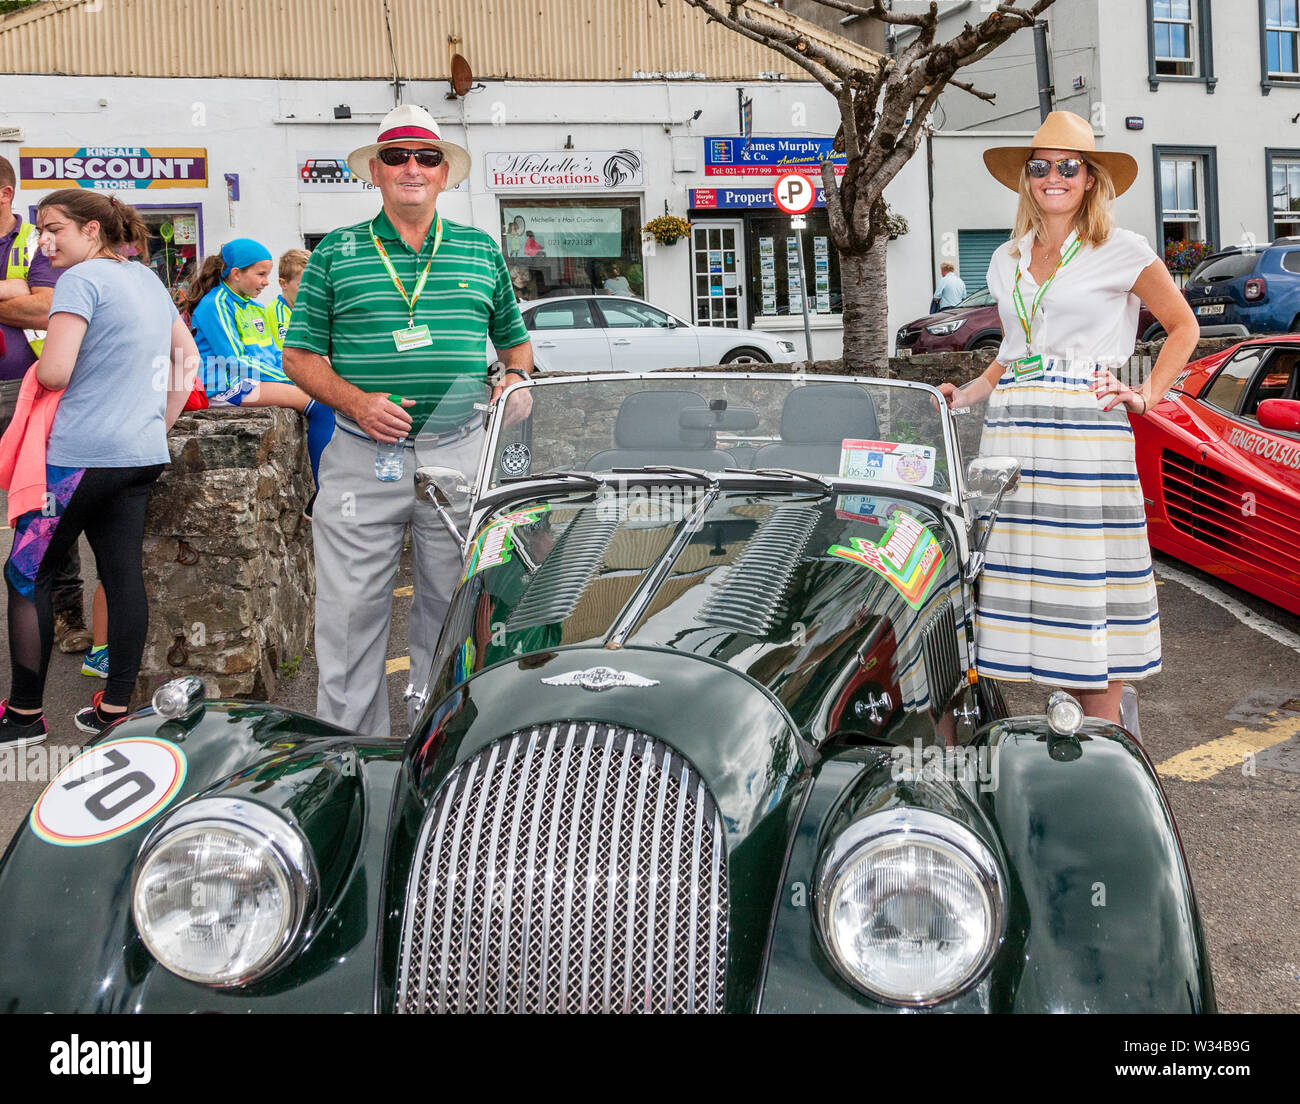 Kinsale, Cork, Ireland. 12th July, 2019. Con and Grace Mulvihill with their 1988 Morgan 44 at the starting line of the Cannononball Retro Road Trip in Kinsale, Co. Cork, Ireland. The classic run starts in Kinsale and takes in Healy Pass, Kenmare, Molls Gap, Inch Beach, Dingle, Slea Head, Conor Pass, Tralee and finishes at Bunratty Castle on July 13th 2019. Credit: David Creedon/Alamy Live News Stock Photo